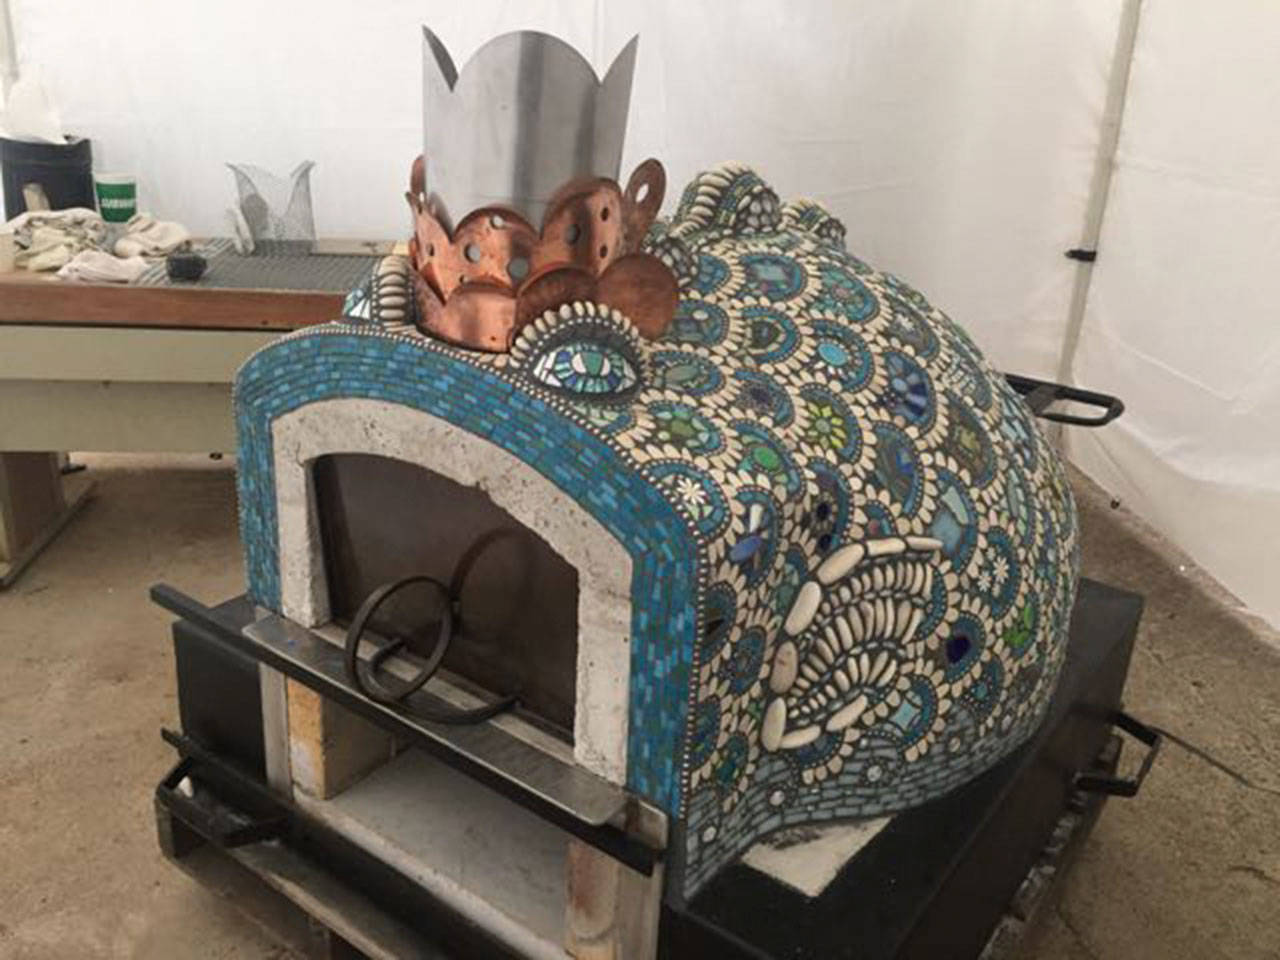 “Neptuna” pizza oven designed by Summers and Edelstein. (Courtesy Photo)